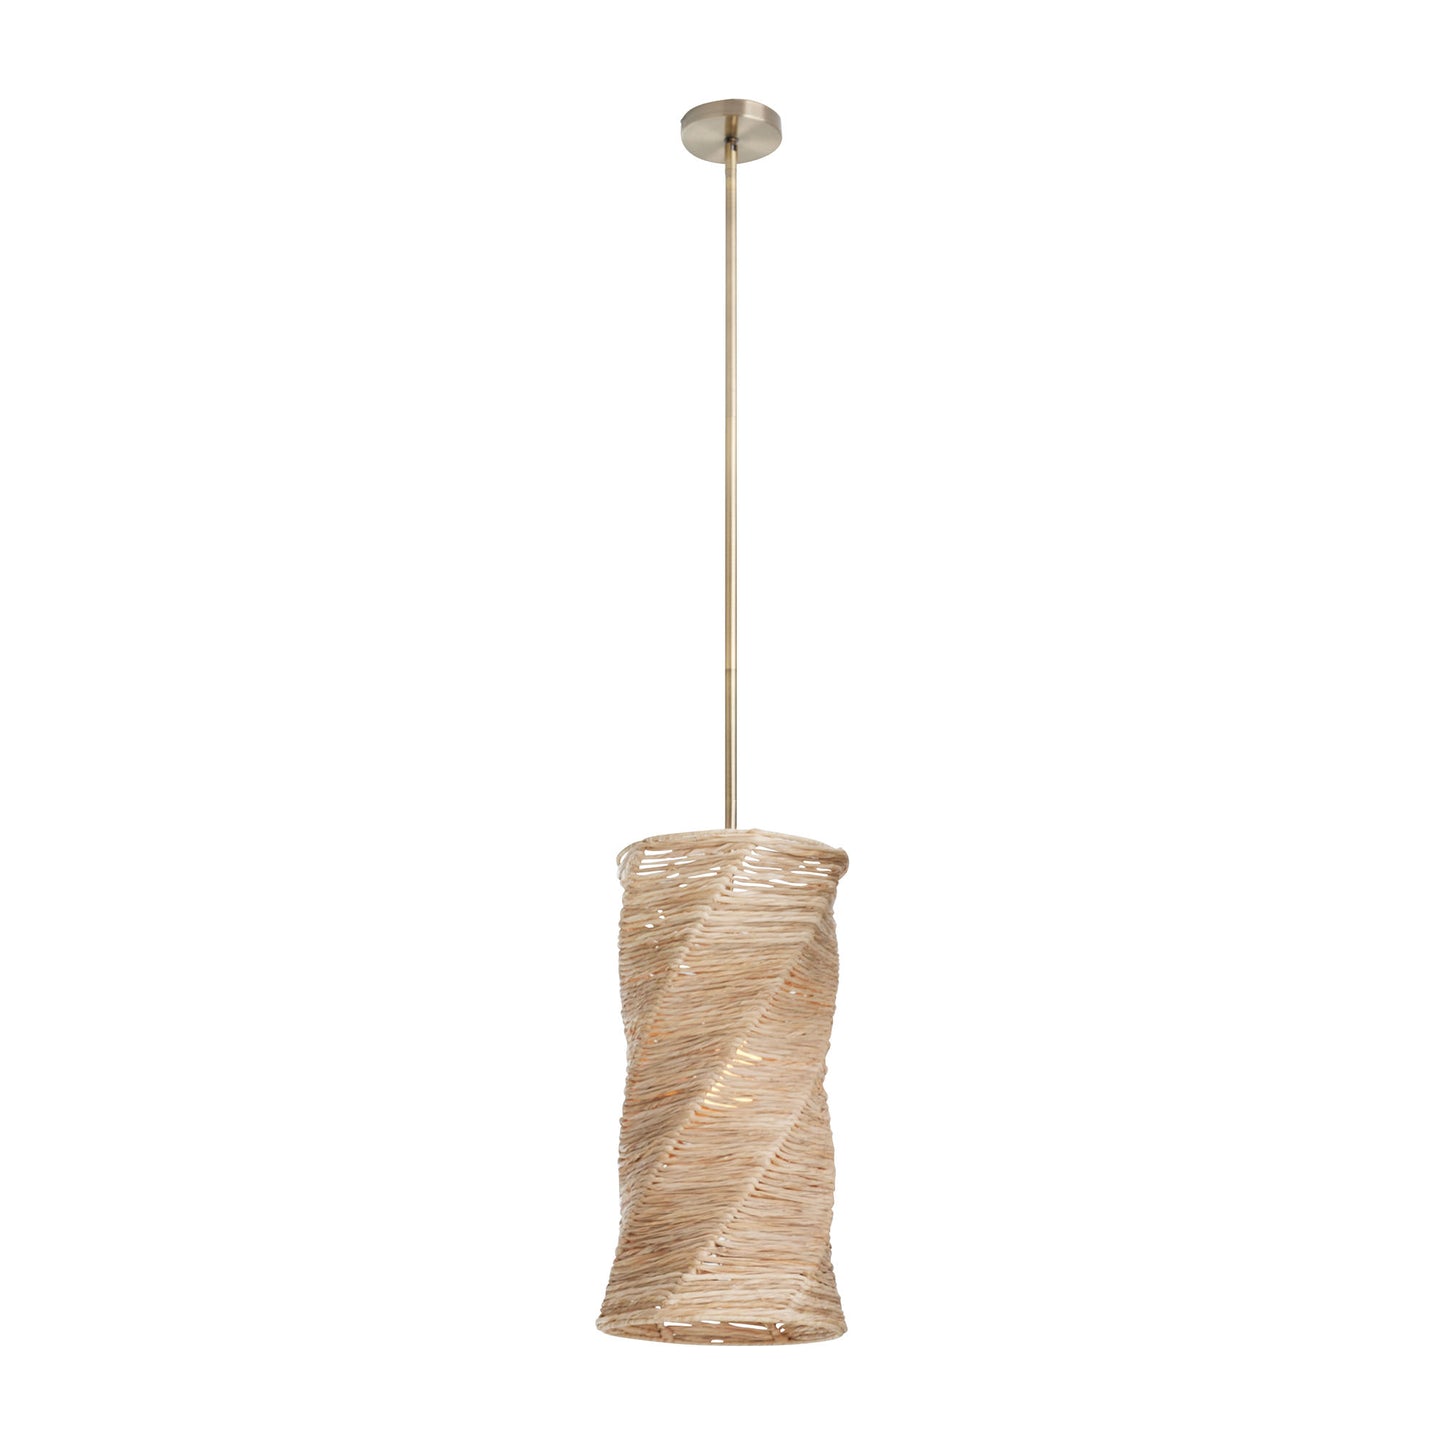 Kish Pendant - Handcrafted Natural Raffia Spiral Shade with Antique Brass Iron Suspension